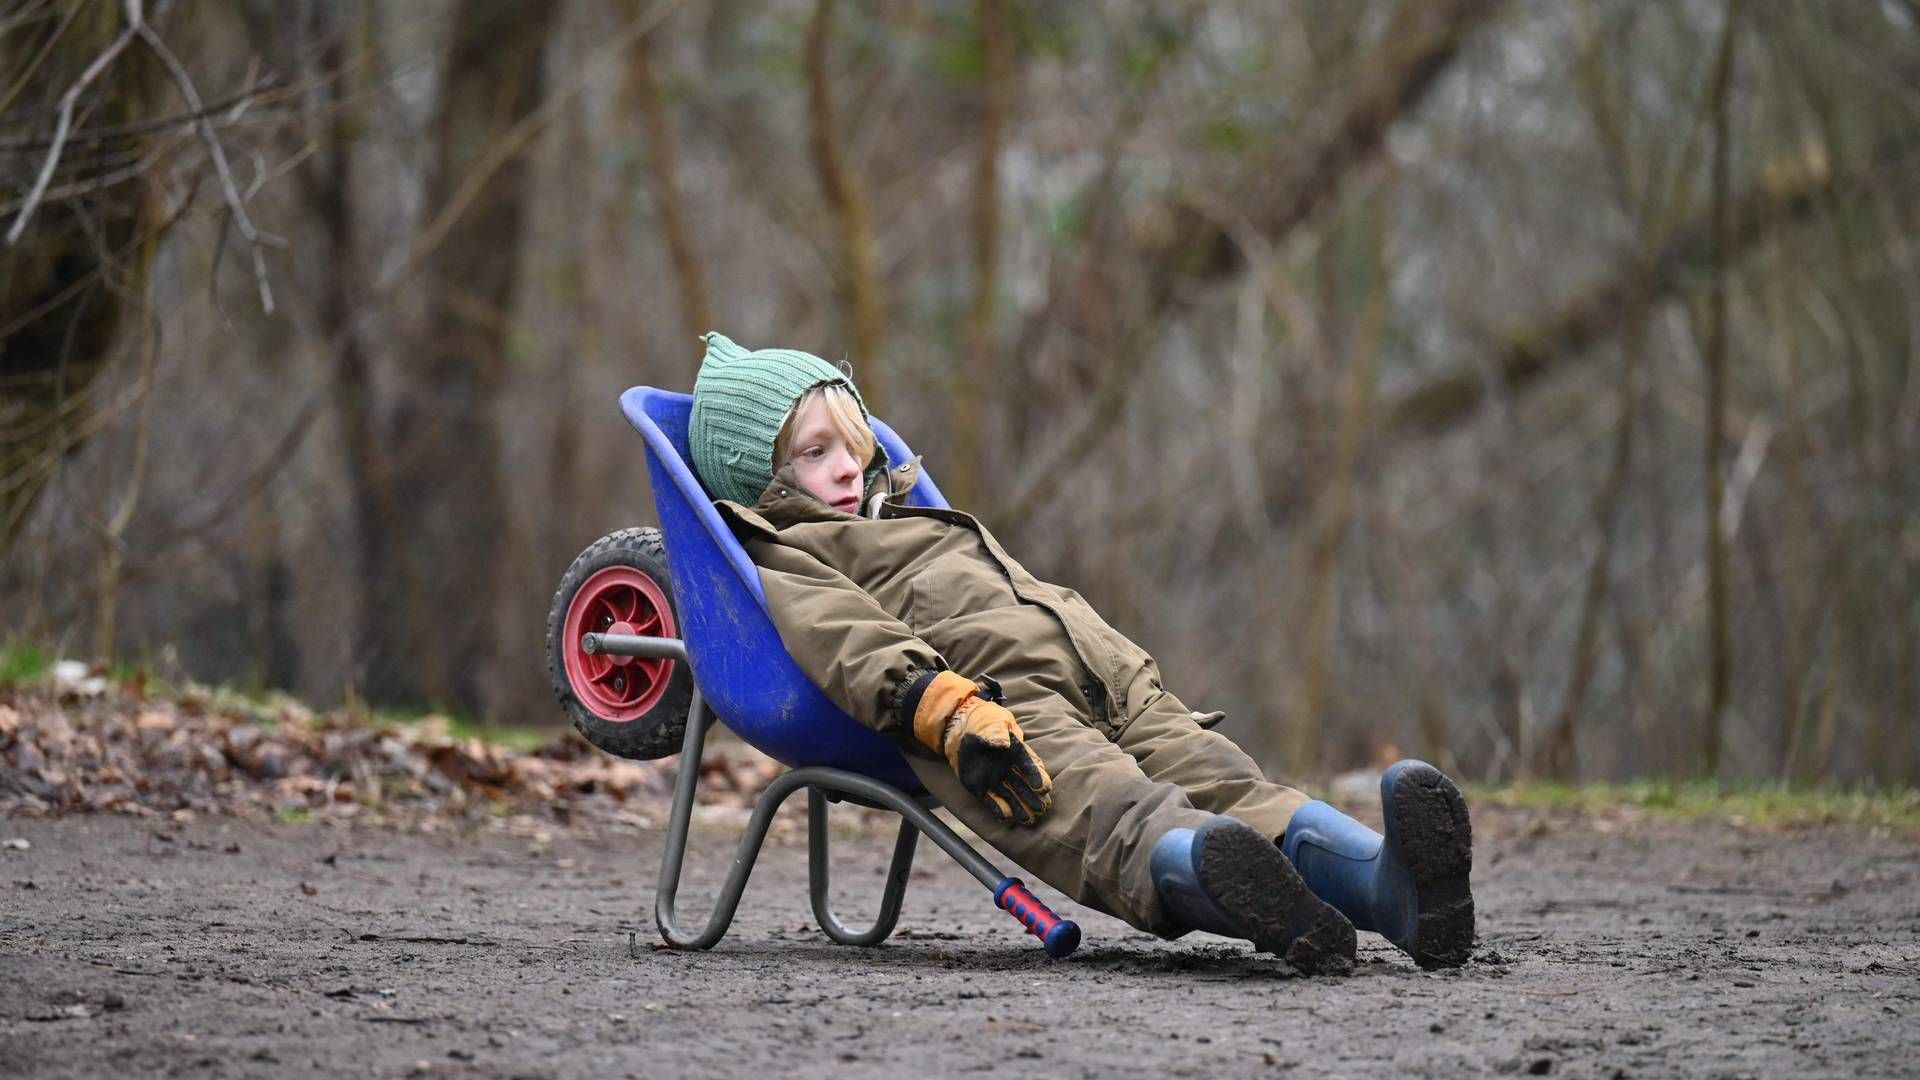 Come rain, sleet or snow - just like Nordic investors dared to put on risk in February, little kids are not afraid to spend their days playing in the woods and even napping outside midwinter across Scandinavia. | Photo: Sergei Gapon/AFP/Ritzau Scanpix